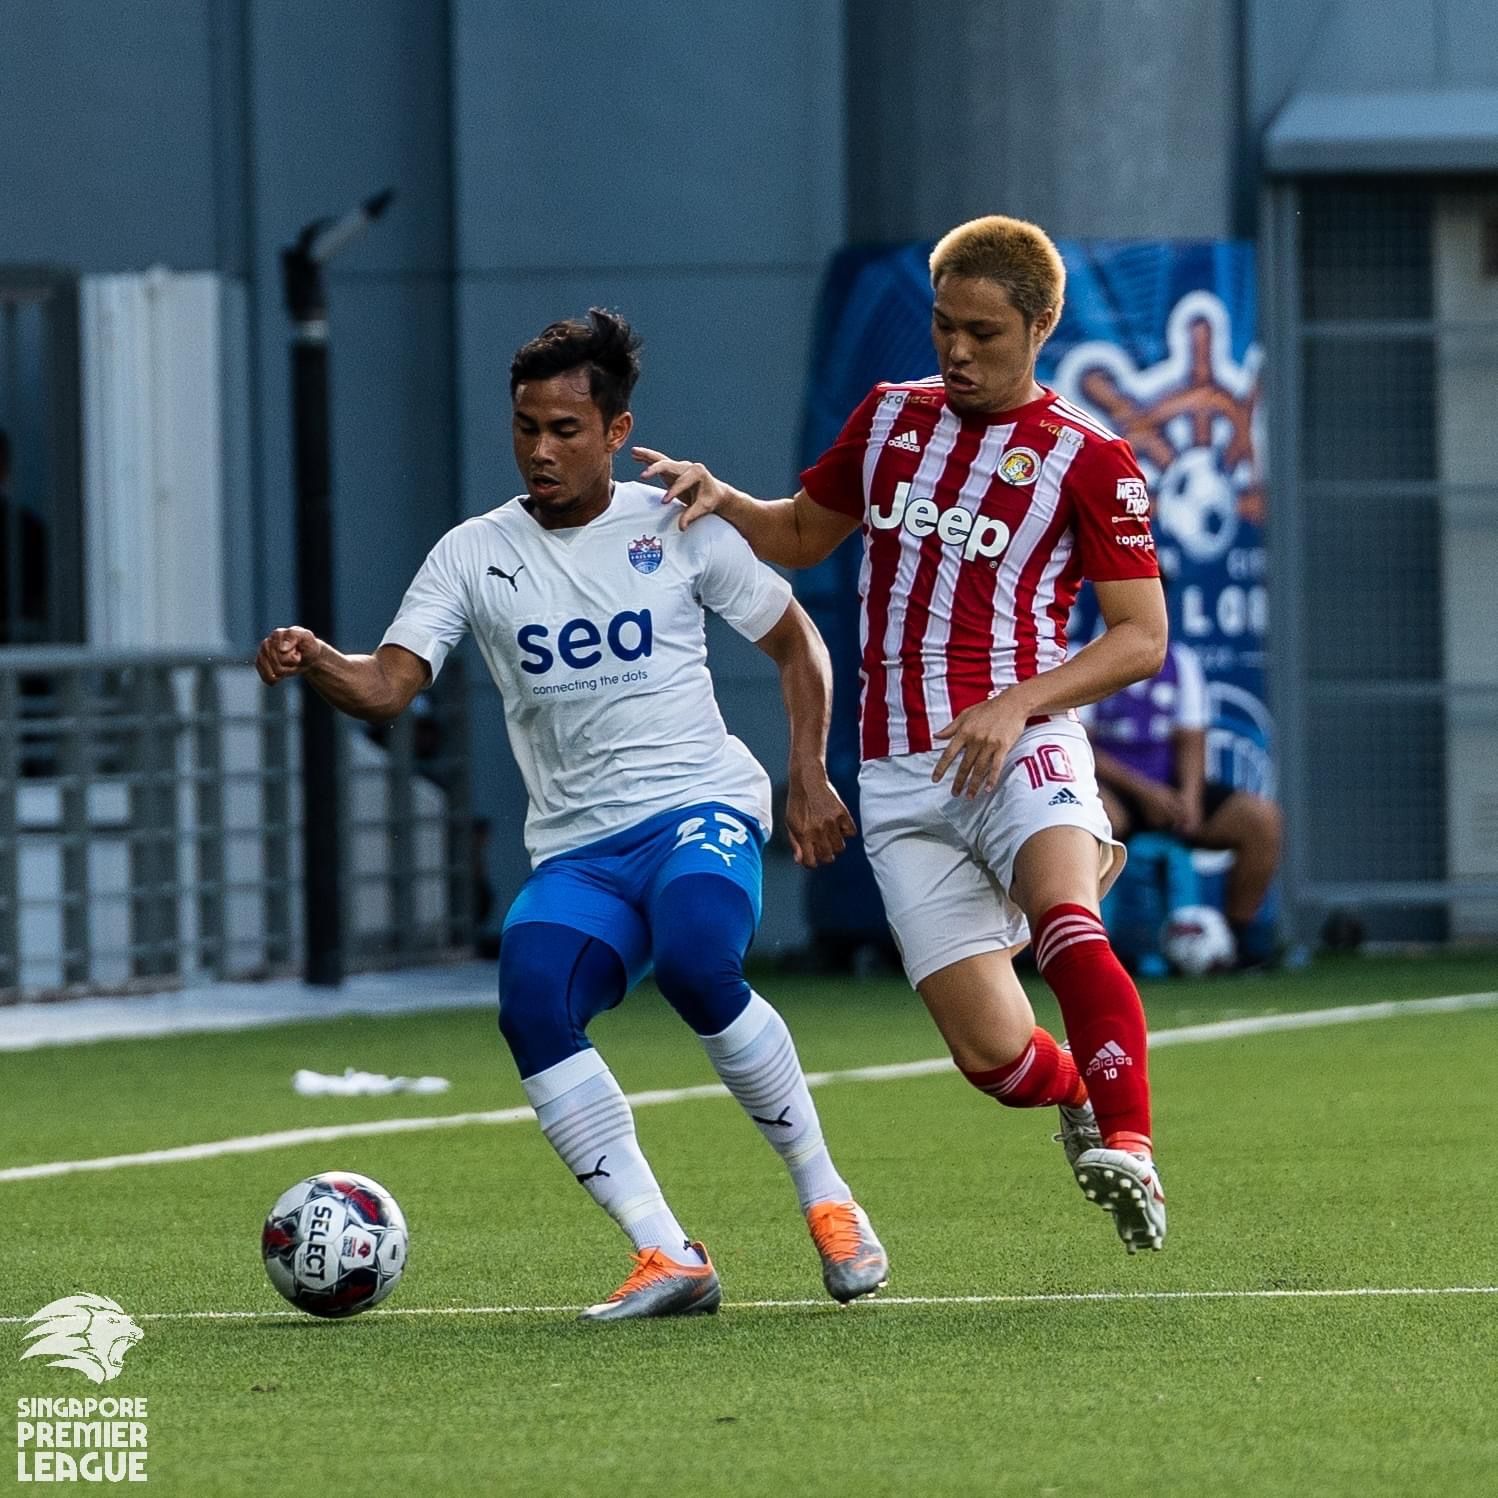 Young Lions vs Balestier Central Prediction, Betting Tips & Odds │08 OCTOBER, 2022